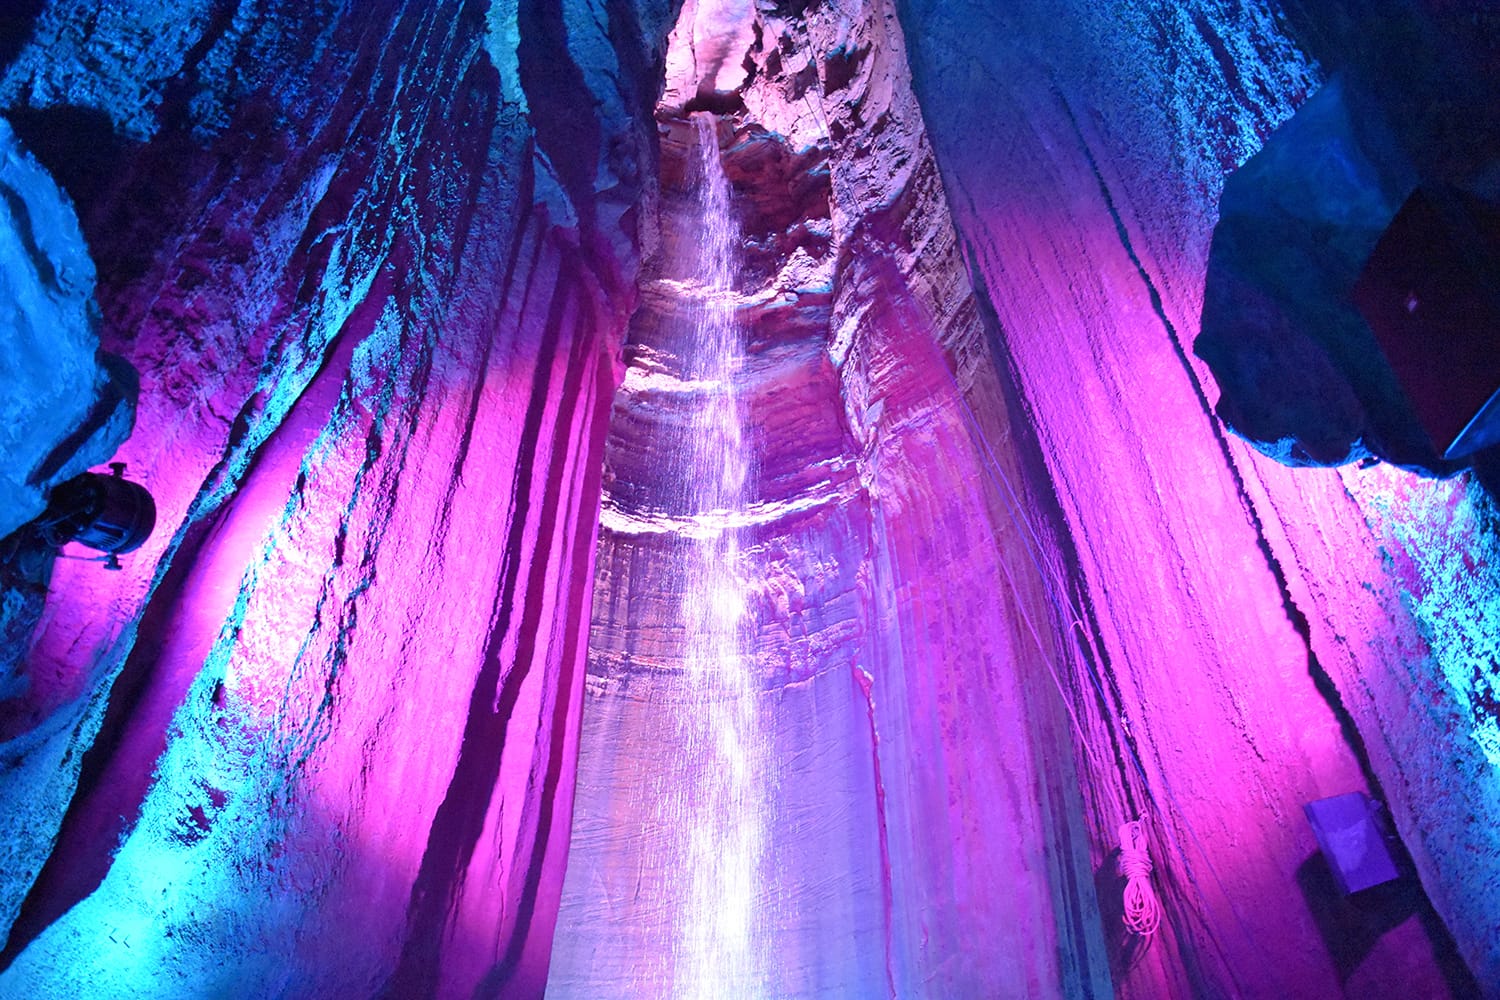 Ruby Falls in Chattanooga, Tennessee, USA